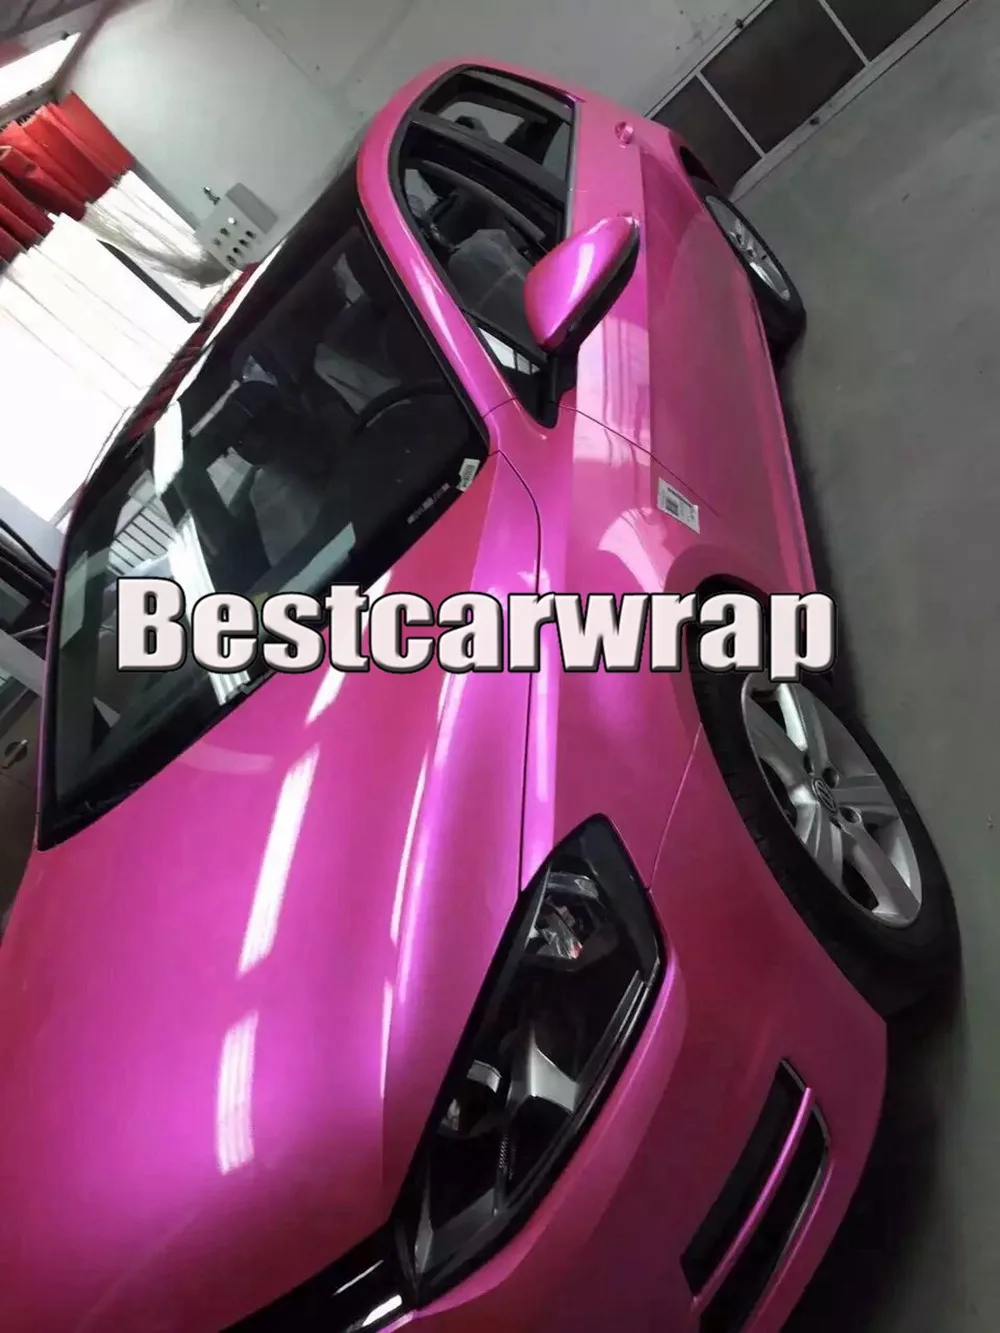 Annhao 1.52*18m Car Interior and Exterior Accessories Rose Red Glossy Pearl  Candy Car Vinyl Wrap - China Car Wrap Vinyl Candy, Candy Wrap